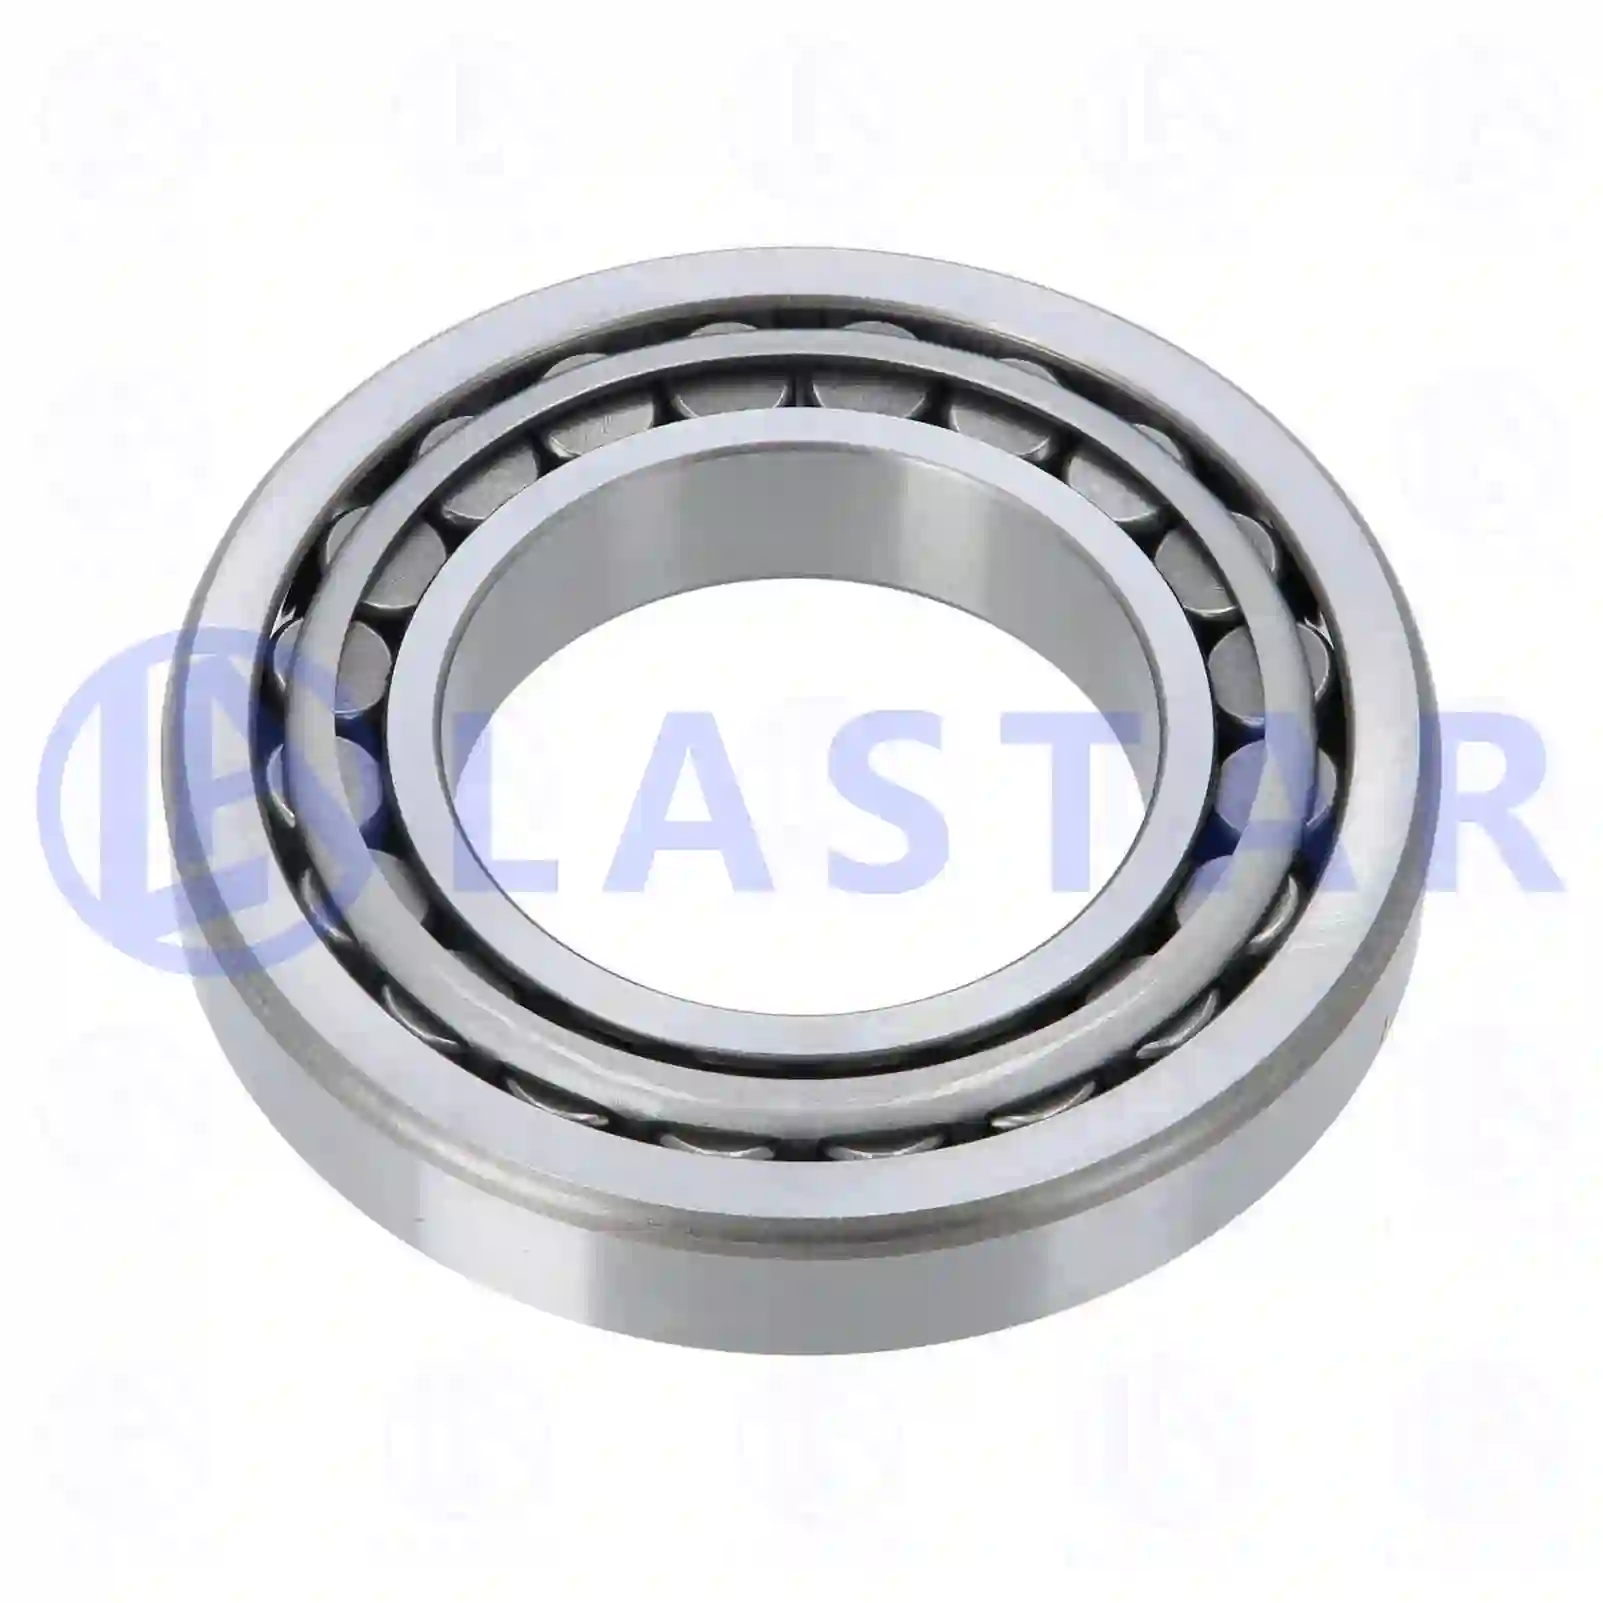 Bearings Tapered roller bearing, la no: 77724823 ,  oem no:01102858, 1102858, 26800060, 06324800021, 06324804800, 06324890021, 87523101710, 5000022784, 1102858 Lastar Spare Part | Truck Spare Parts, Auotomotive Spare Parts